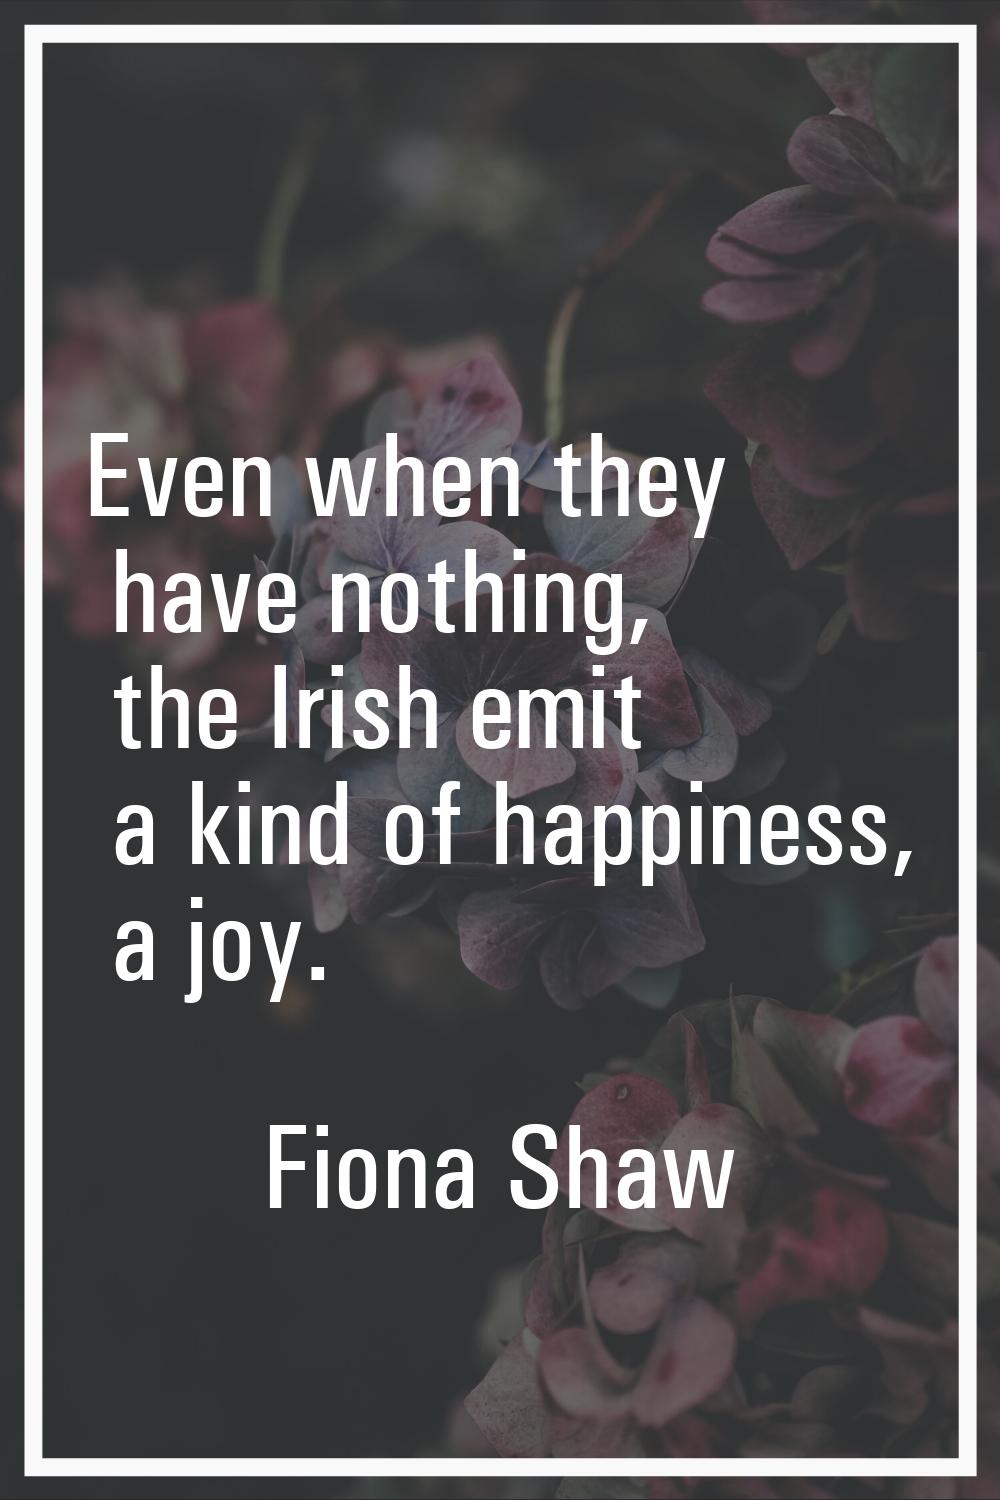 Even when they have nothing, the Irish emit a kind of happiness, a joy.